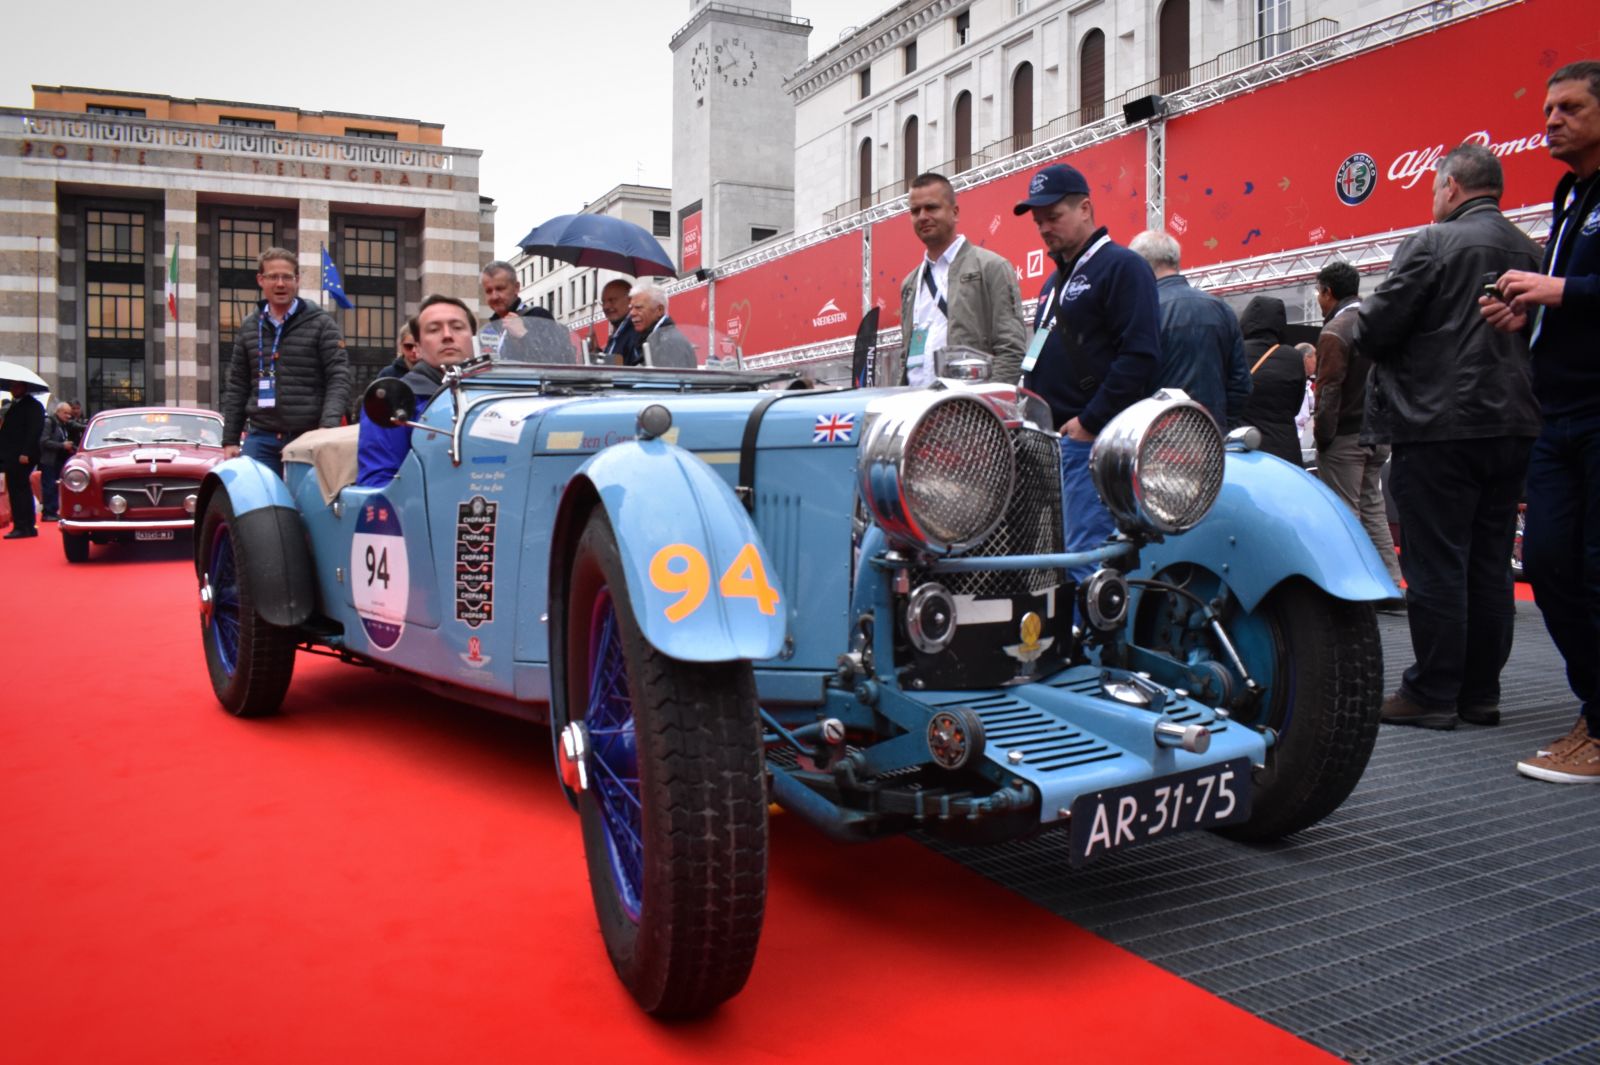 The red carpet of the Mille Miglia “Village” is a madhouse parade in the hours leading up to the start of the race.